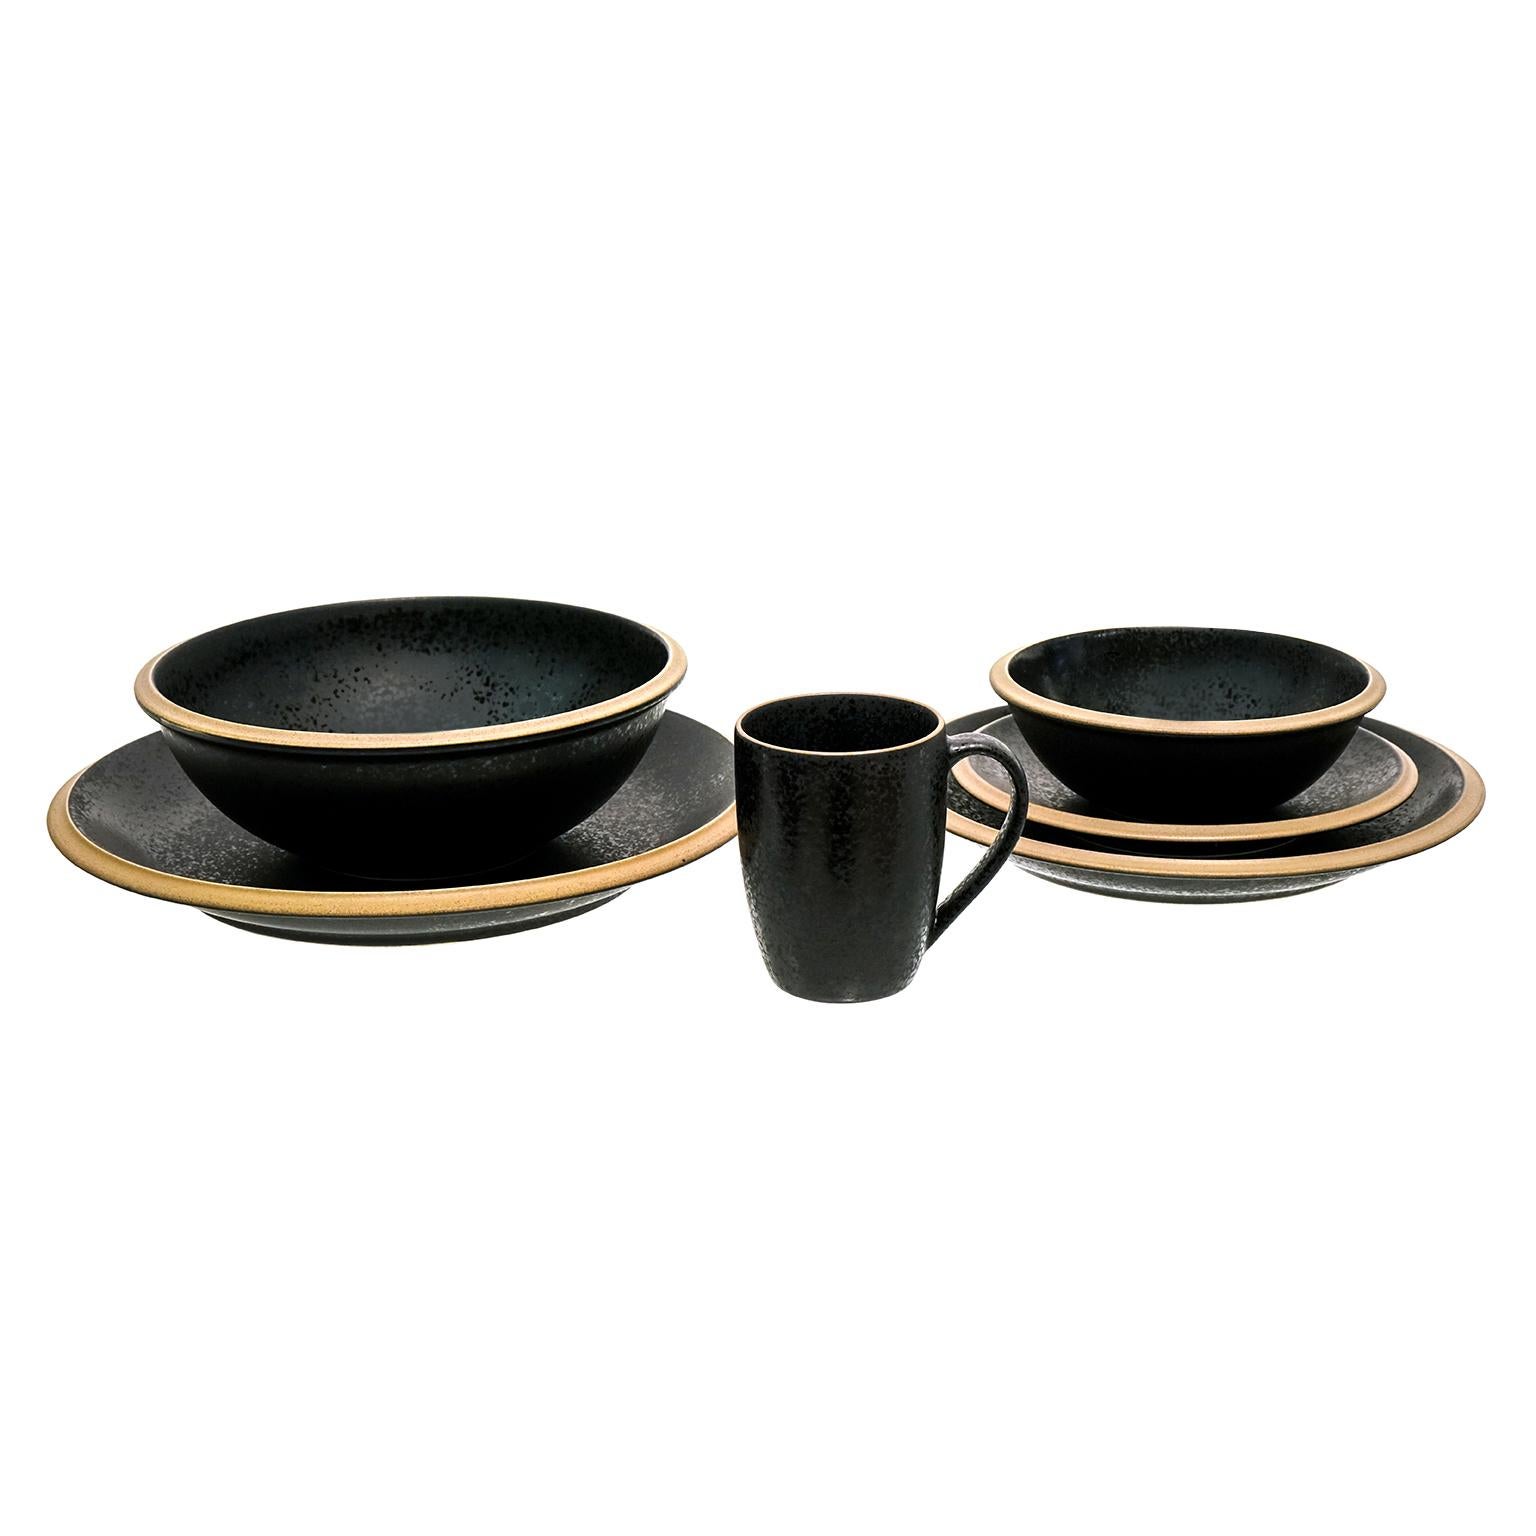 Dansk Santiago Black One-of-a-kind Set of Dinnerware In Excellent Condition For Sale In Litchfield, CT